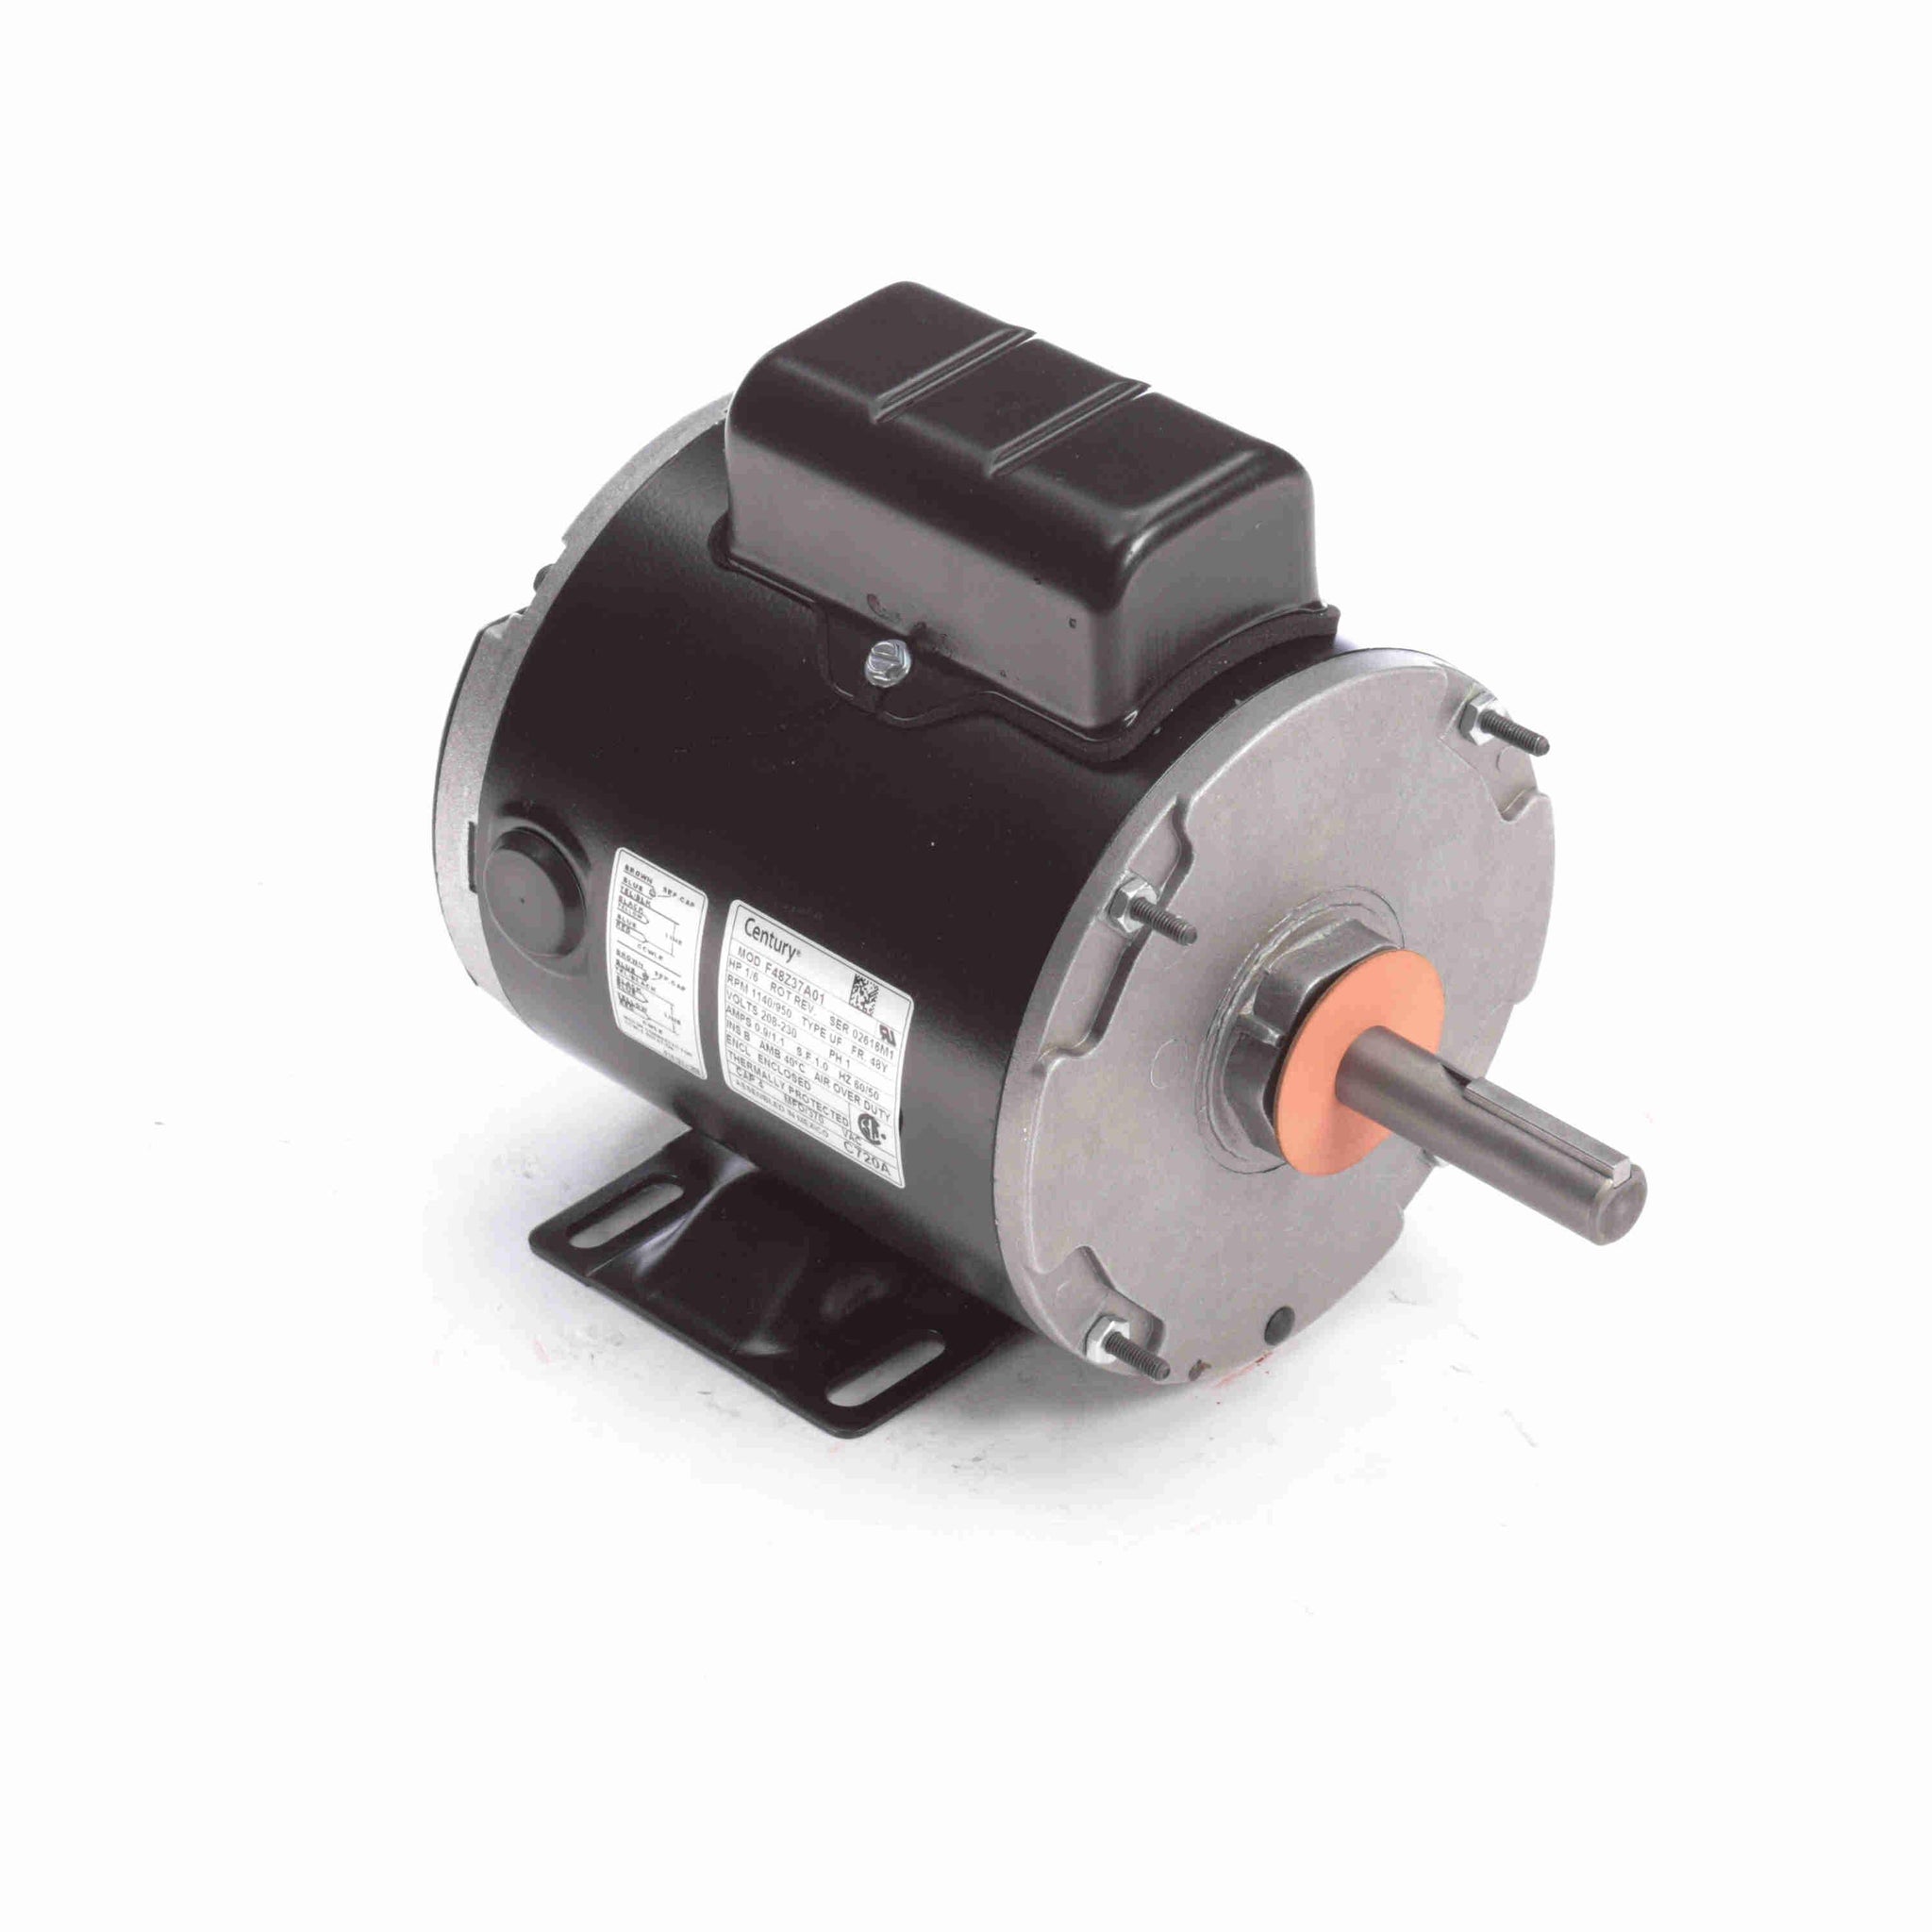 C720A -  1/6 HP Transformer Cooling Fan Motor, 1140/950 RPM, 2 Speed, 208-230 Volts, 48 Frame, TEAO - Hardware & Moreee